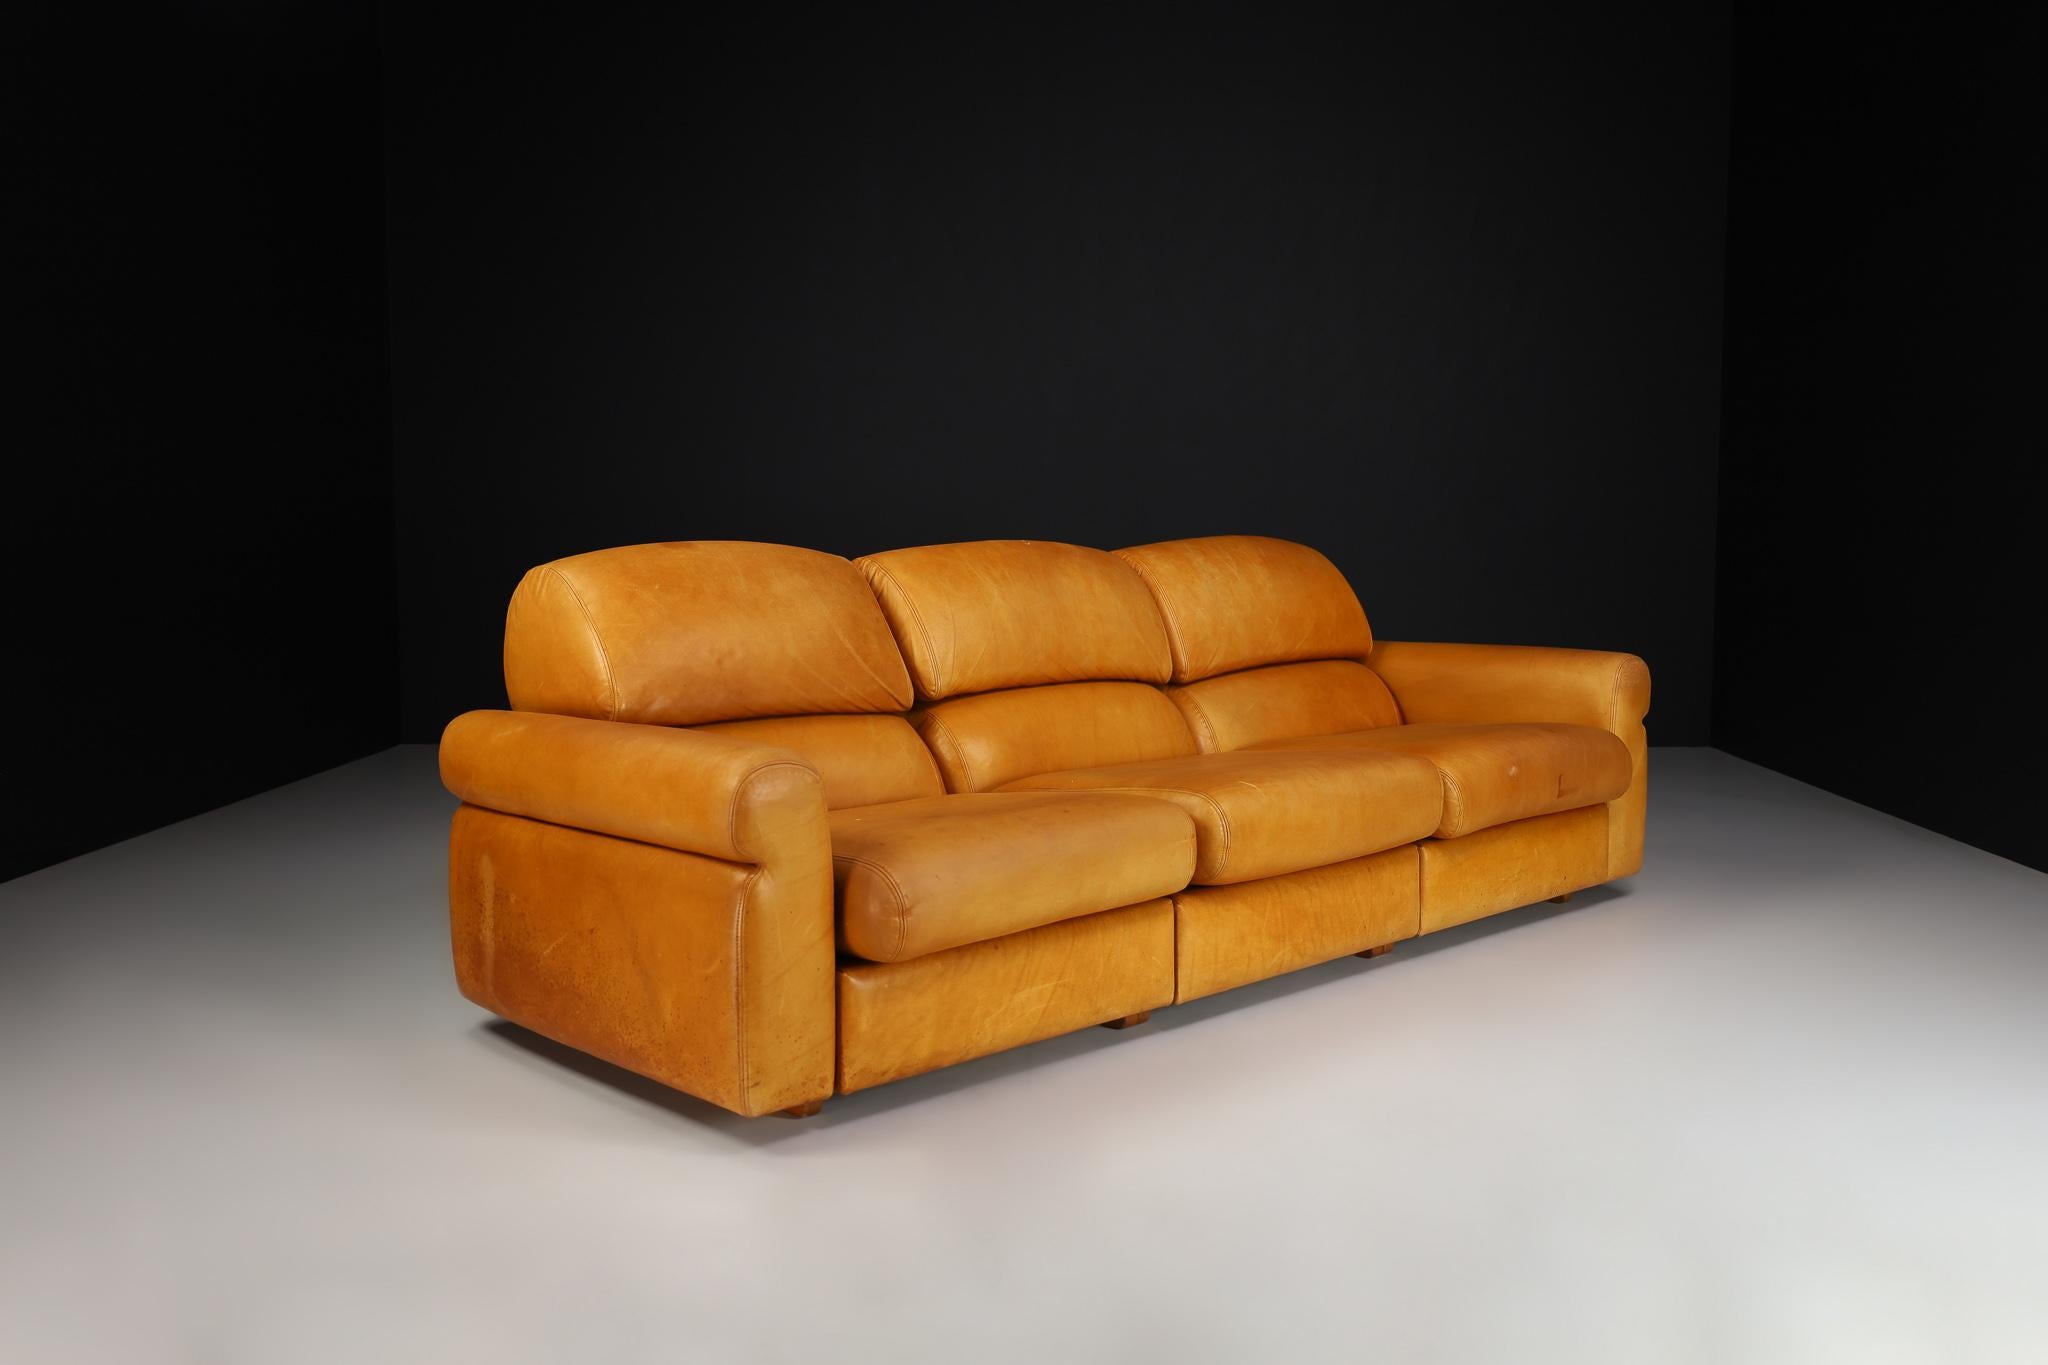 Large Mid-Century Modern Lounge sofa in Cognac Leather, Italy 1960s

Mid-Century Modern leather lounge Sofa manufactured and designed in Italy 1960s. It is in beautiful vintage condition, with a minor patina on the leather. This sofa would be an